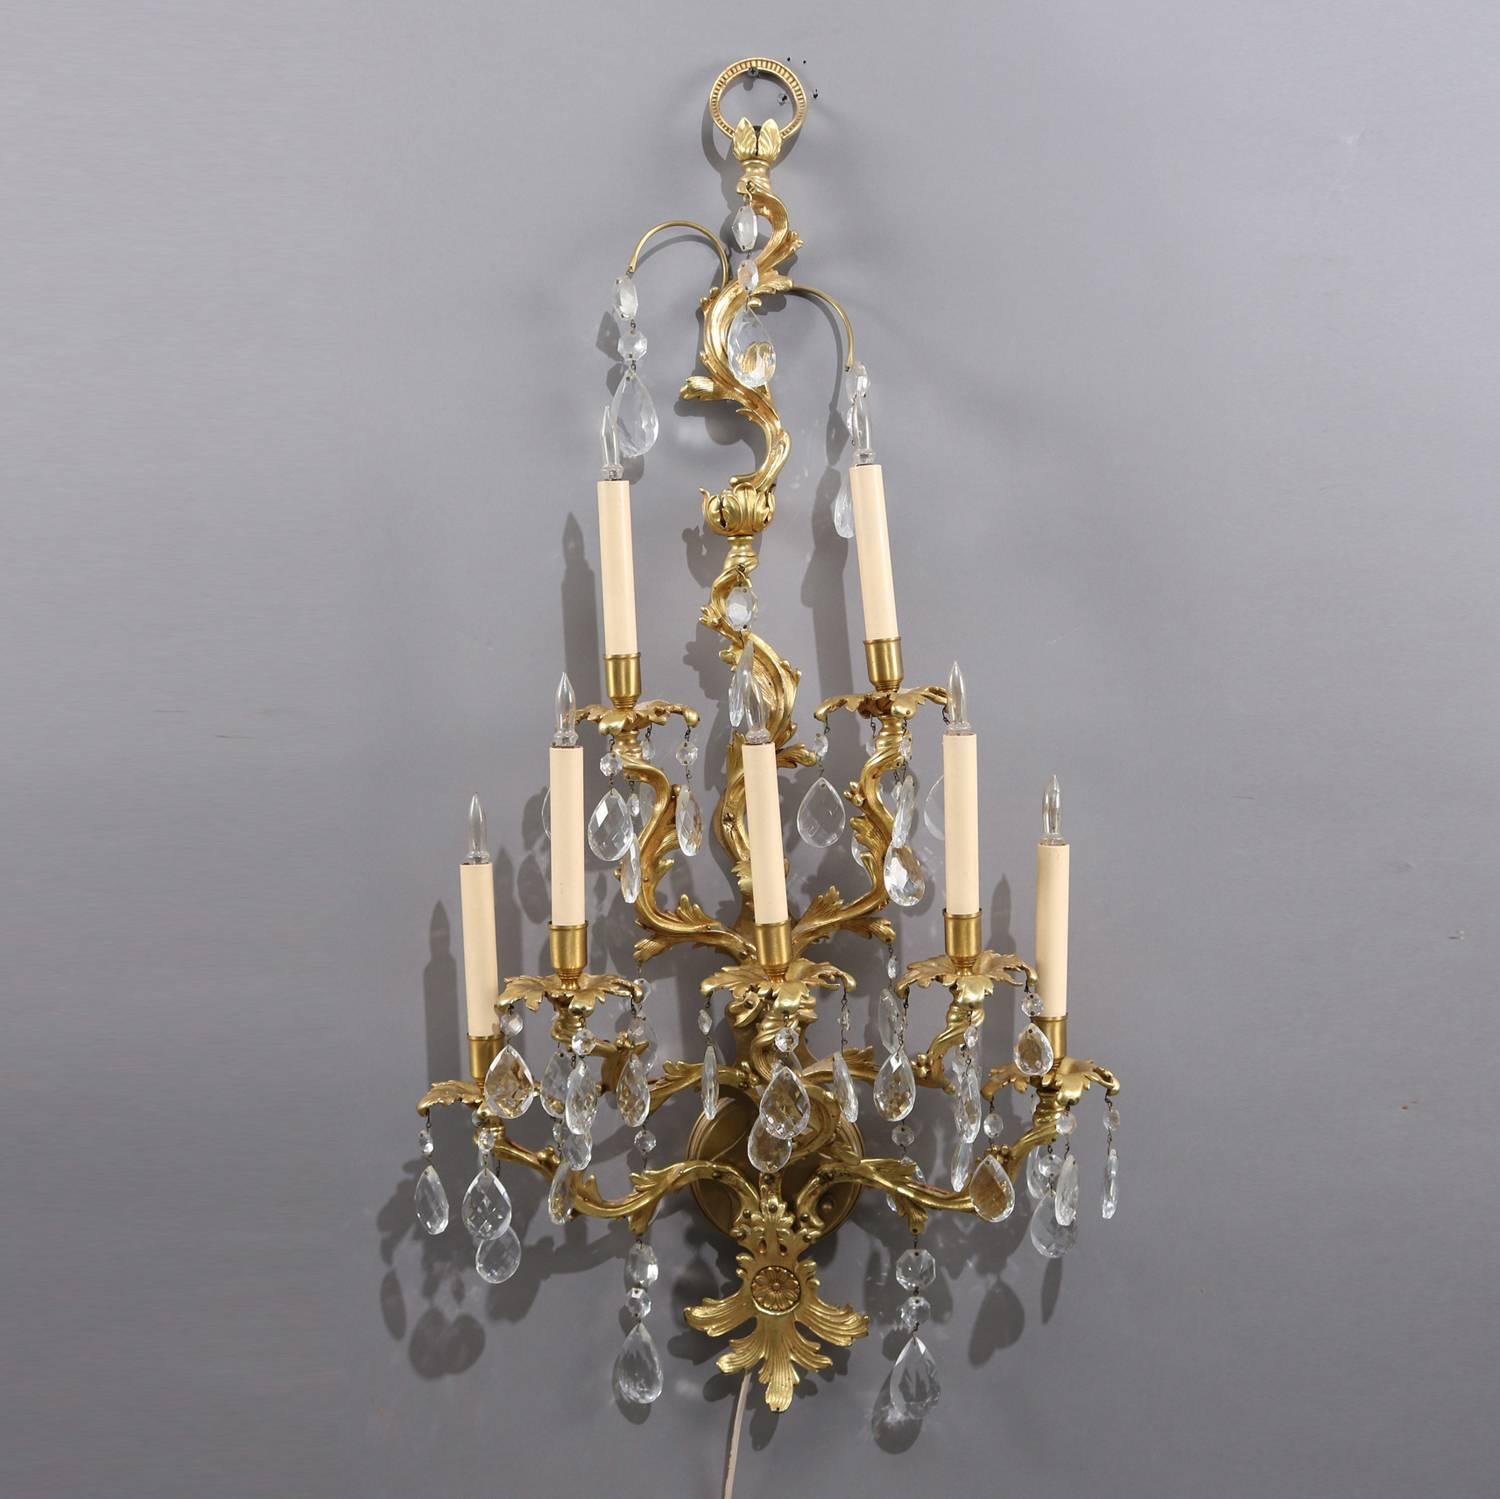 Oversized pair of French Rococo gilt wall sconces feature gilt bronze in foliate form with palmette apron and seven candle lights with overall hanging cut crystals, electric having plugs and switches, circa 1940.

Measures: 42